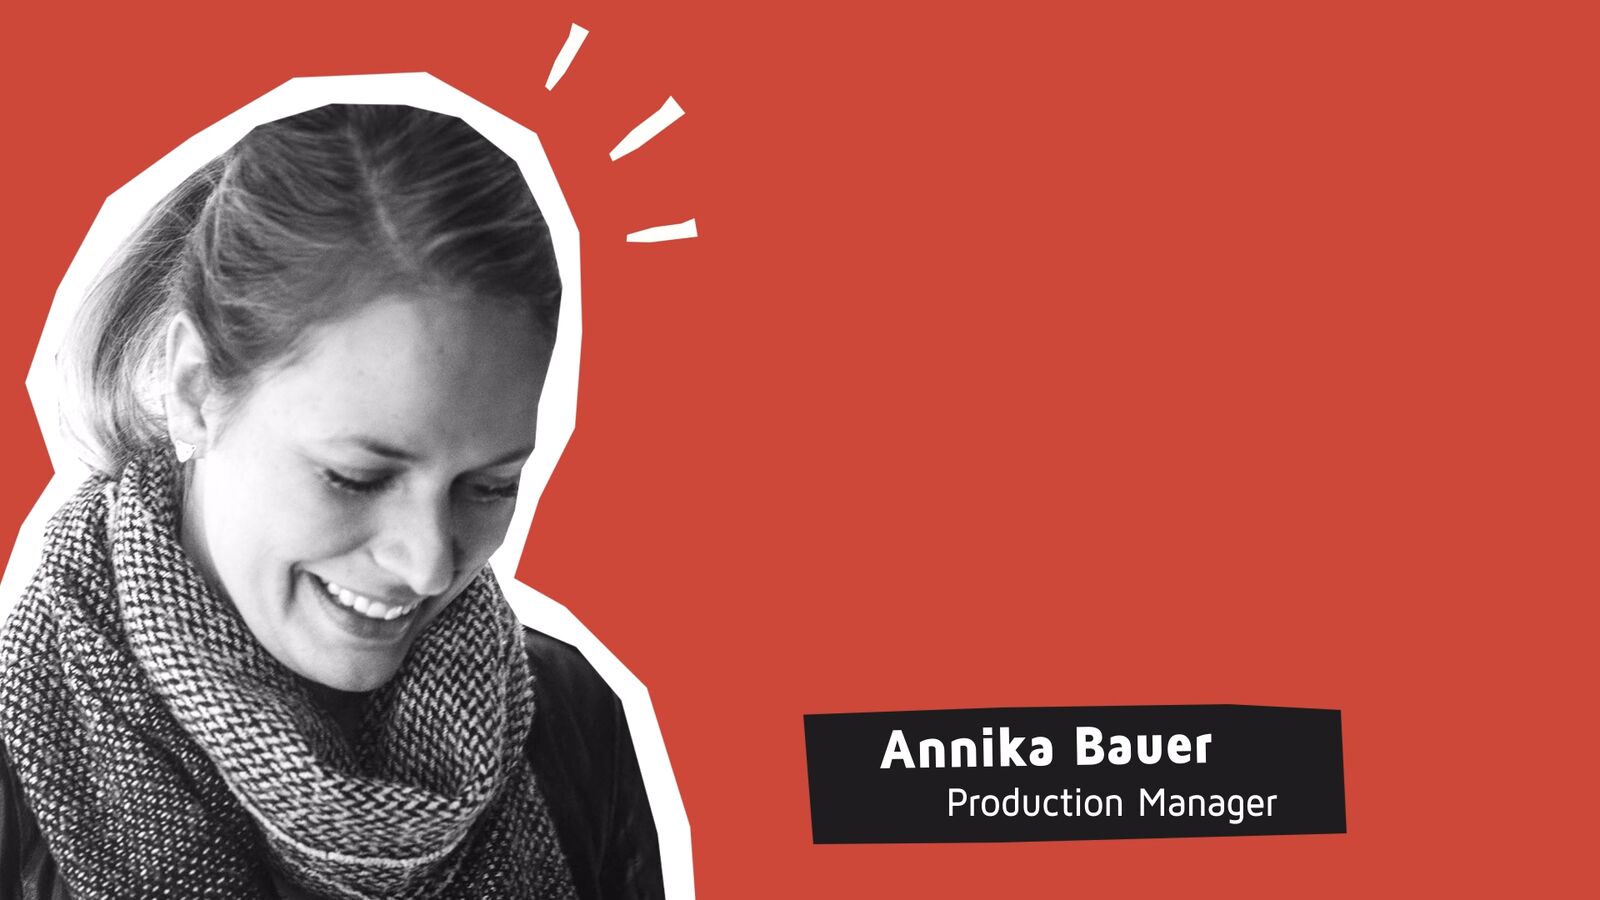 4 Questions with Annika Bauer